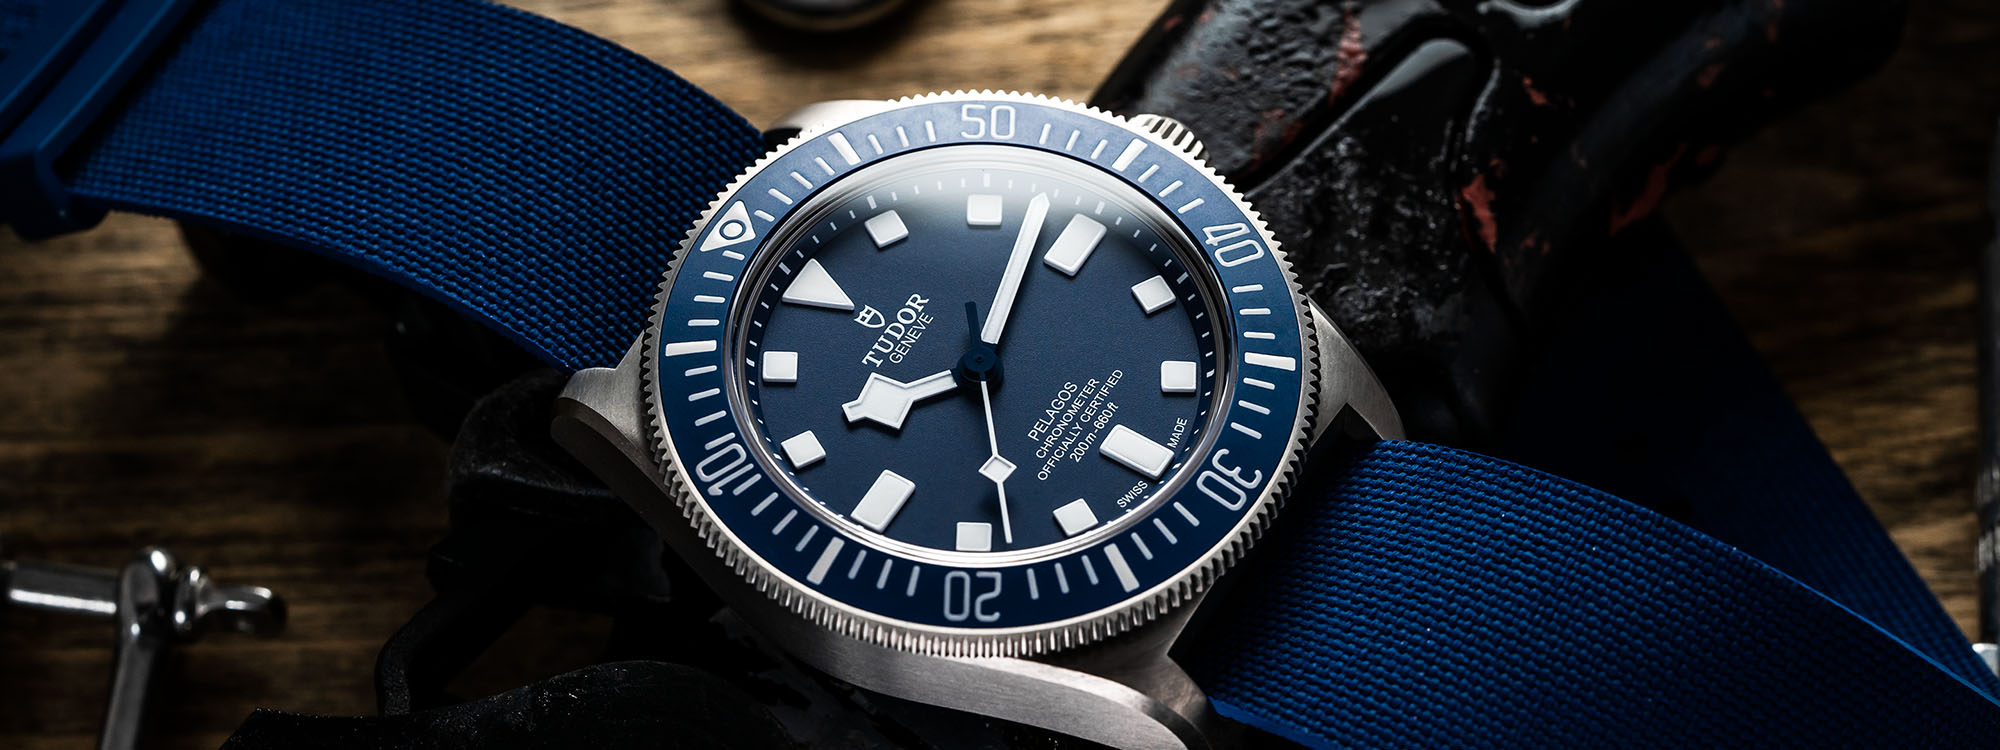 31 Blue Dial Watches from Under $300 to $50,000+